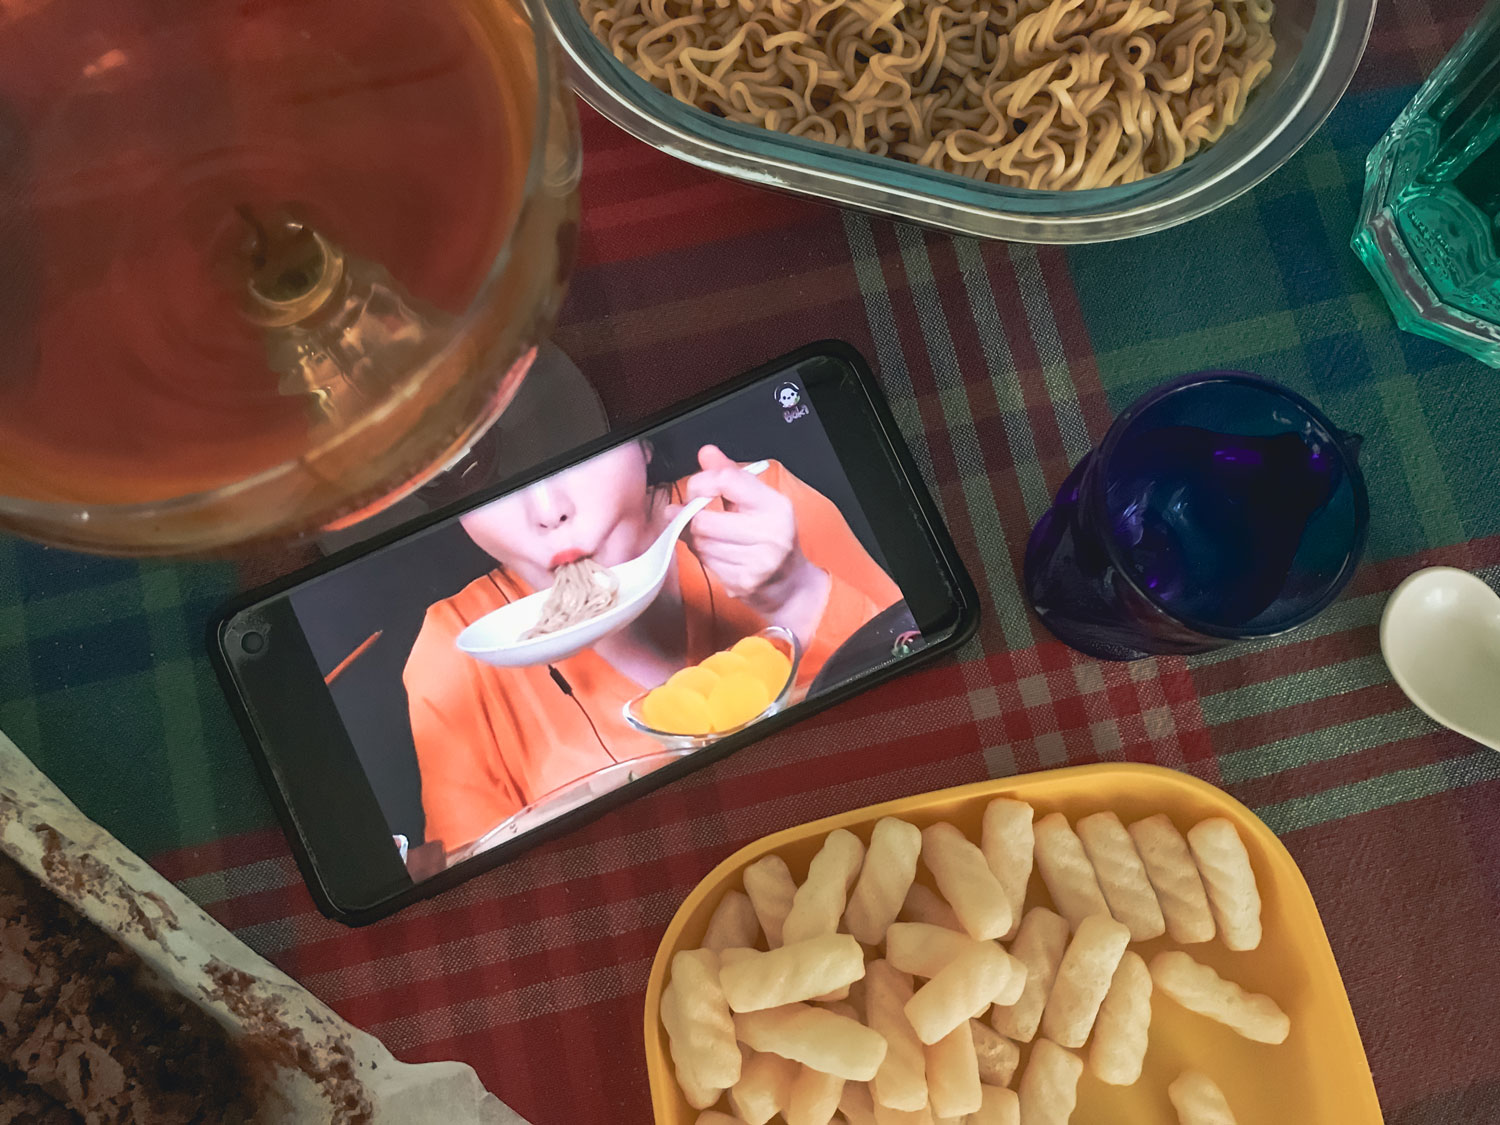 An open smart phone featuring a person eating.